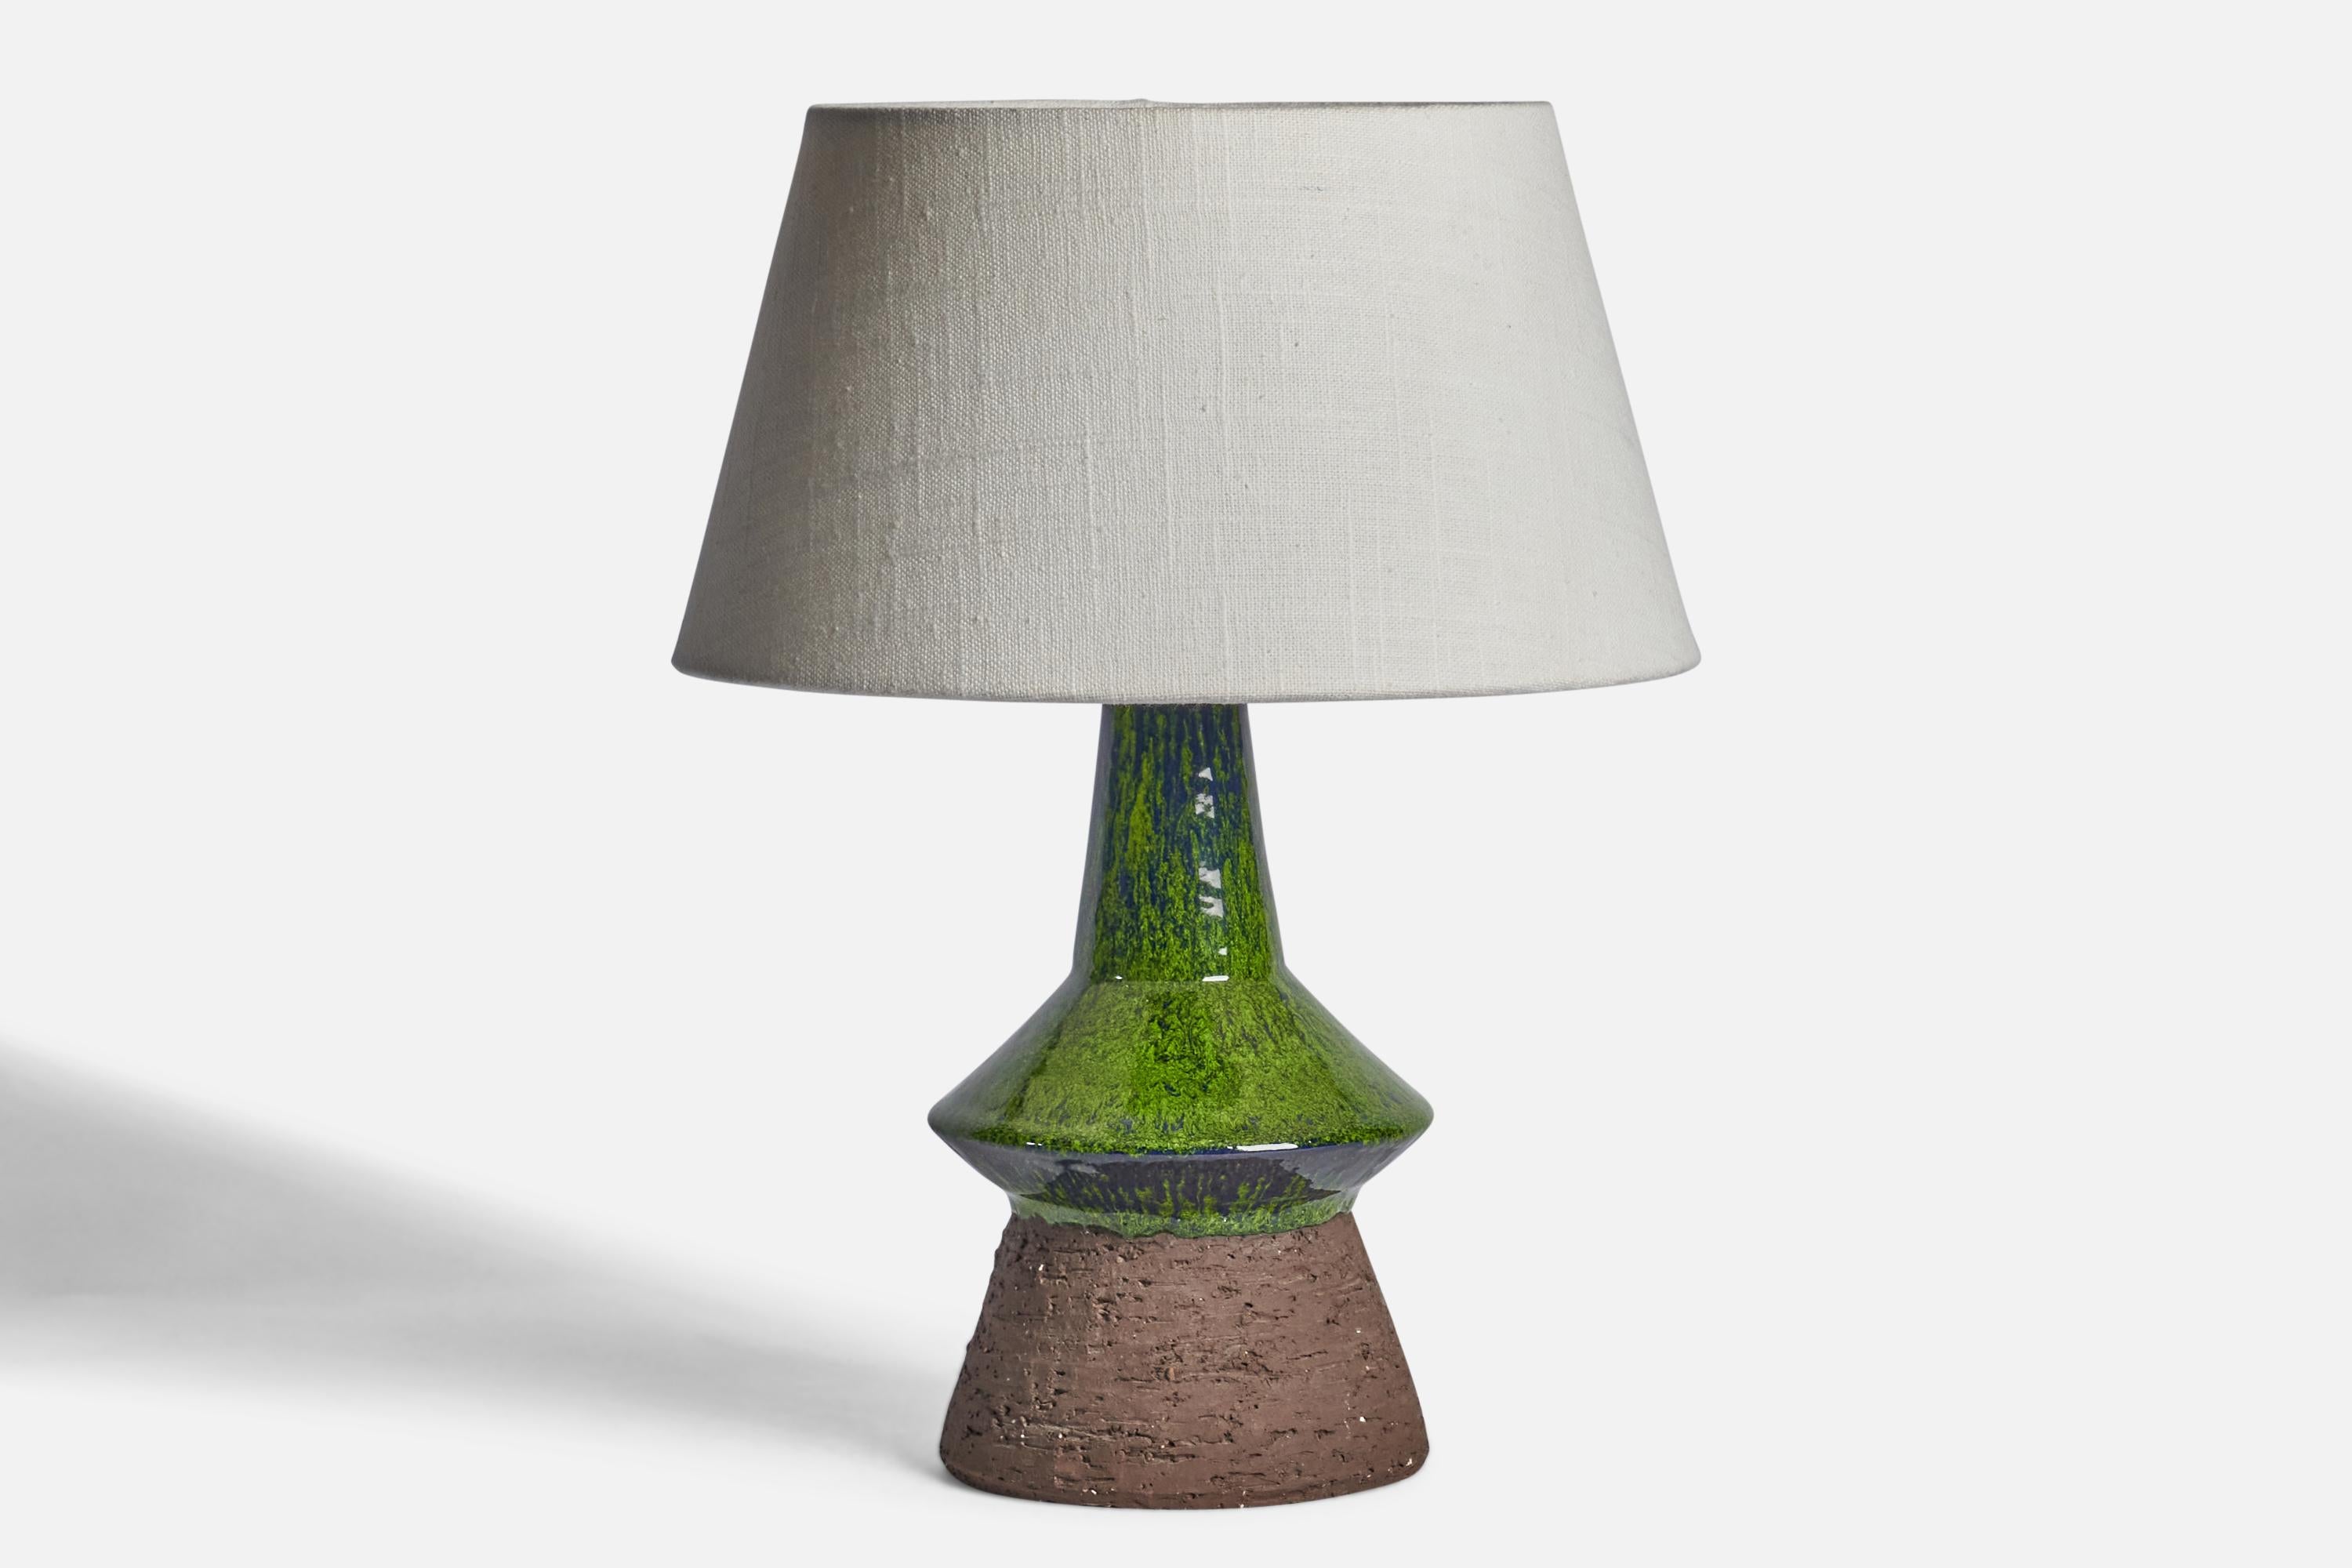 A green semi-glazed stoneware table lamp designed and produced in Denmark, c. 1960s.

Dimensions of Lamp (inches): 10.75” H x 5.25” Diameter
Dimensions of Shade (inches): 7” Top Diameter x 10” Bottom Diameter x 5.5” H 
Dimensions of Lamp with Shade